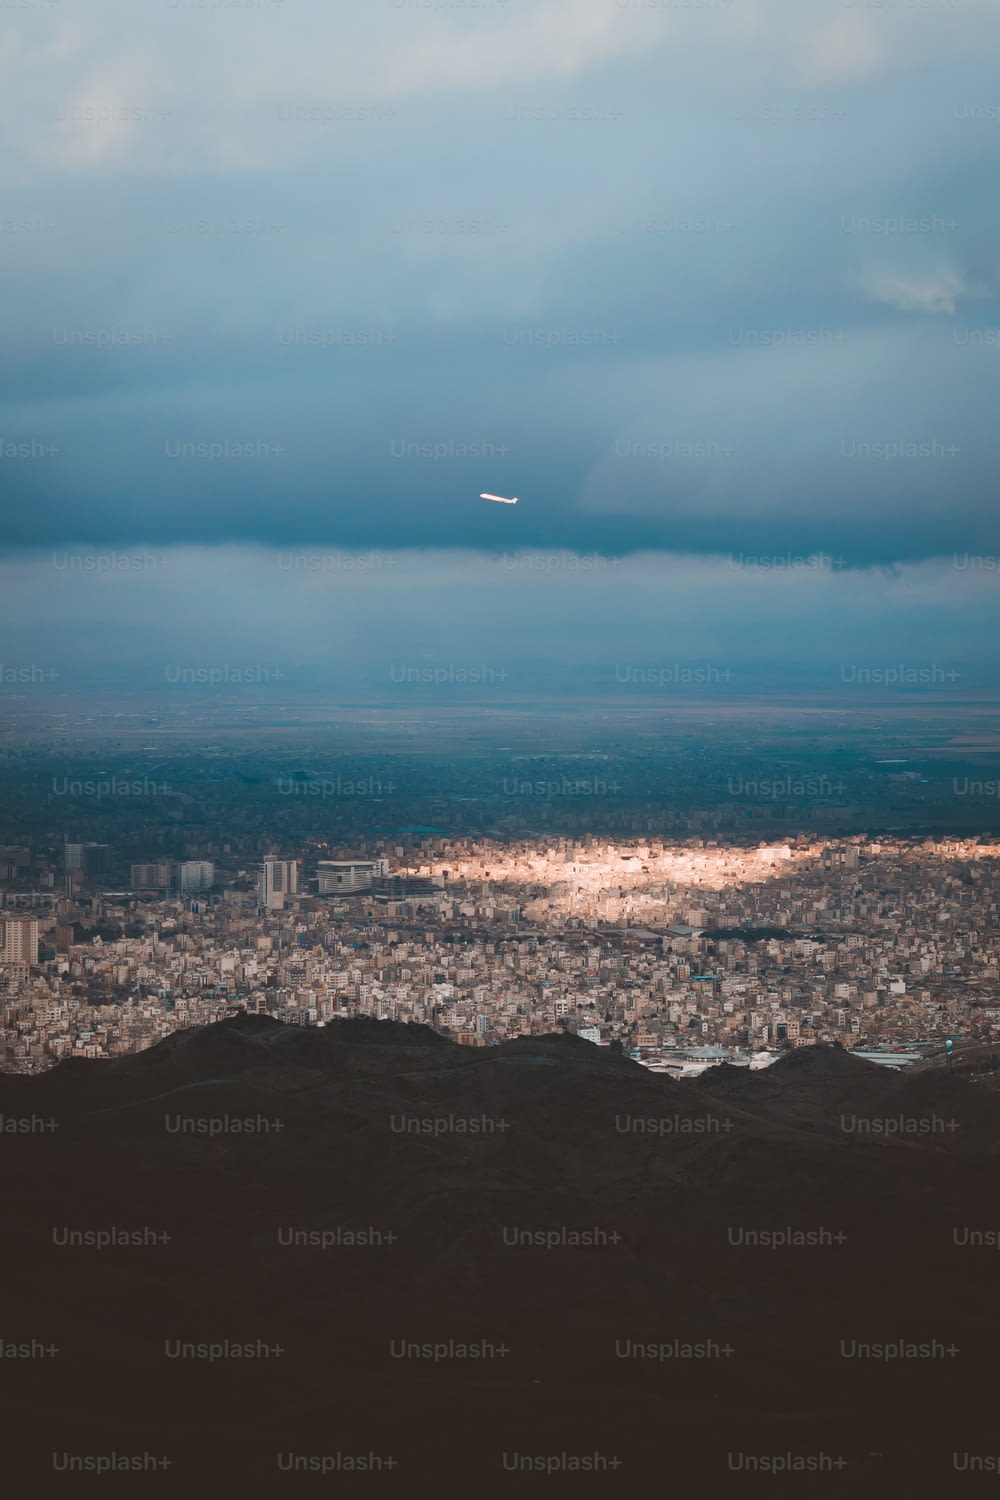 an airplane flying over a city under a cloudy sky